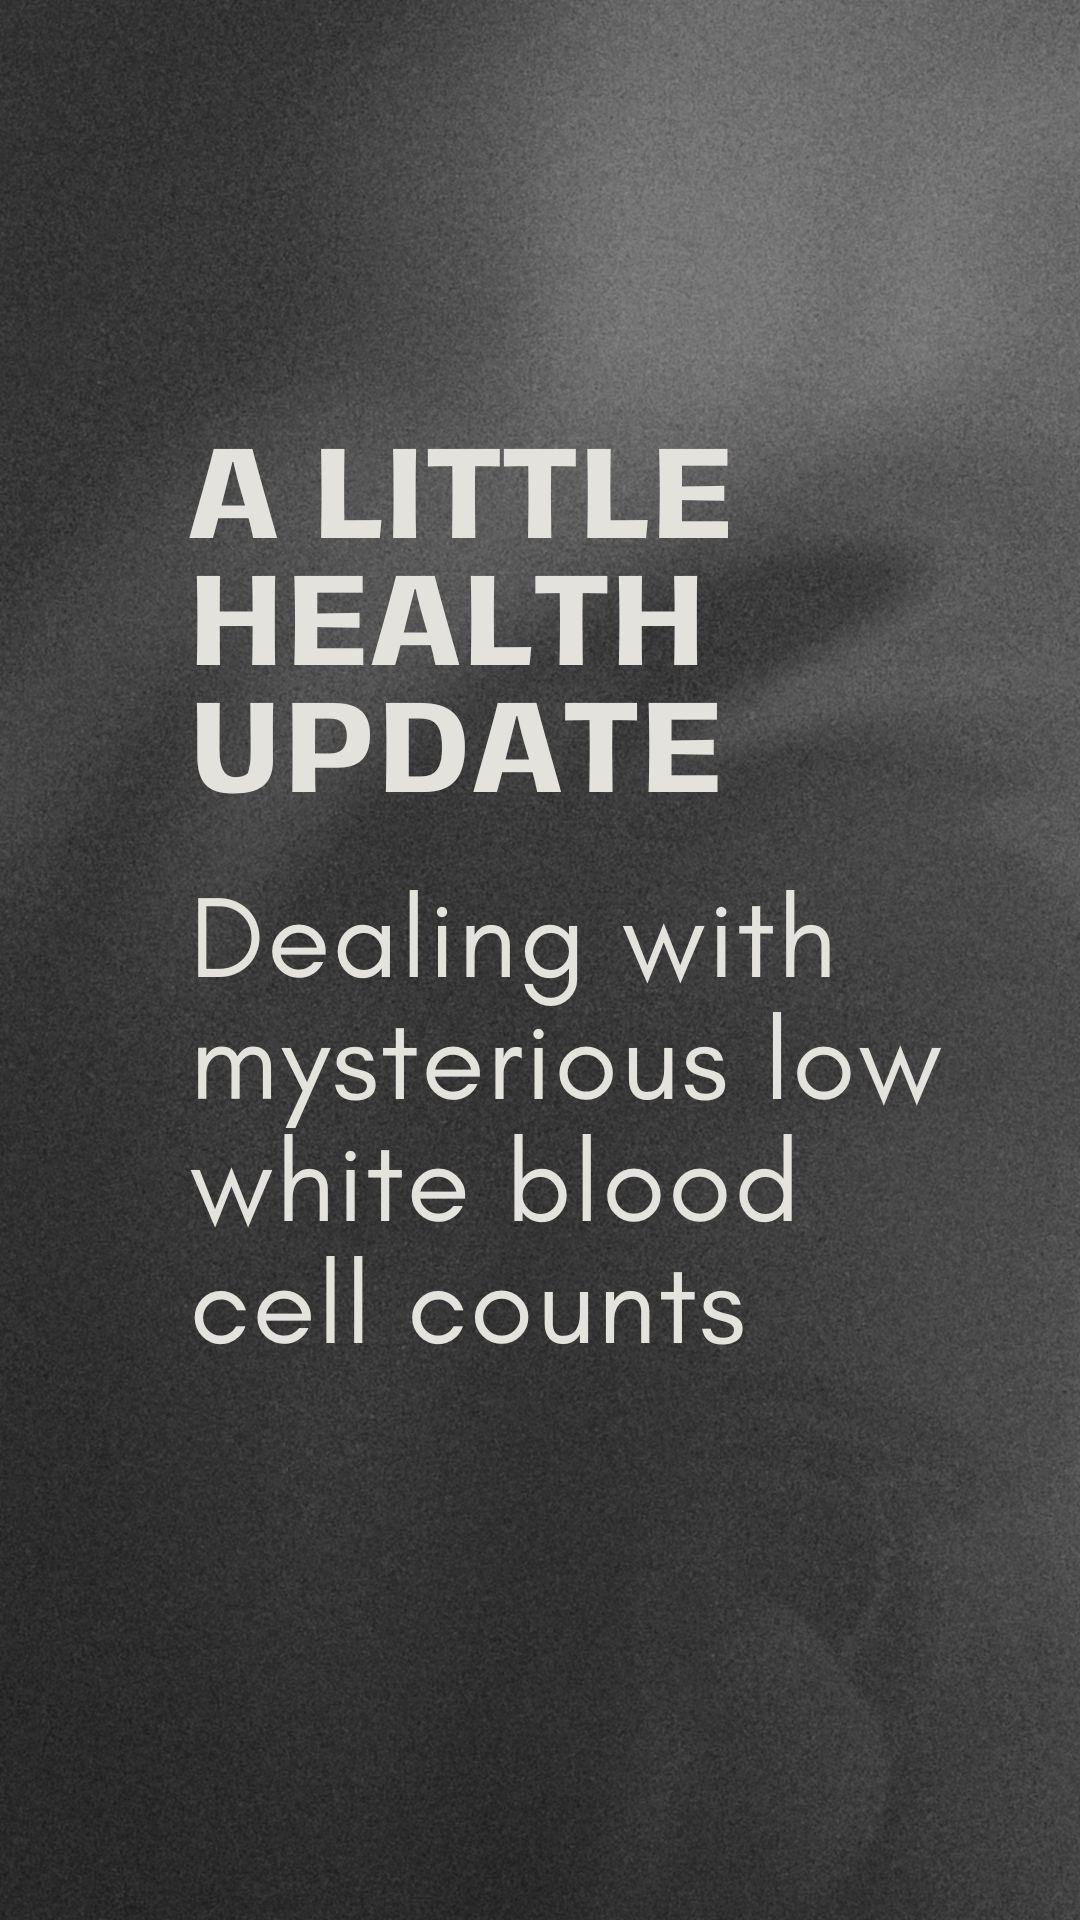 A little health update: Dealing with mysterious low white blood cell counts